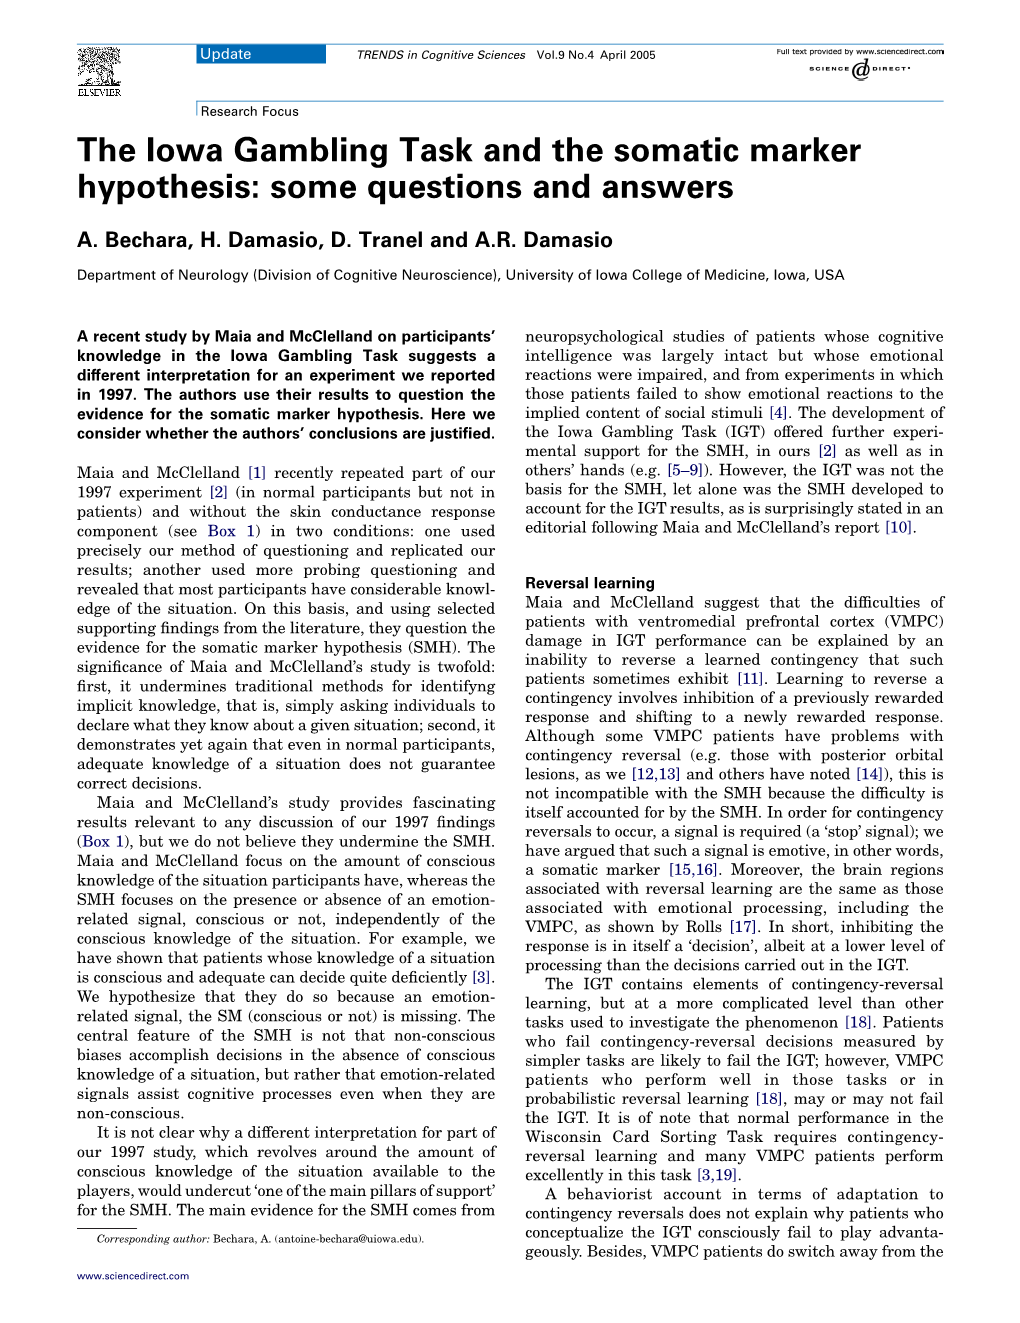 The Iowa Gambling Task and the Somatic Marker Hypothesis: Some Questions and Answers